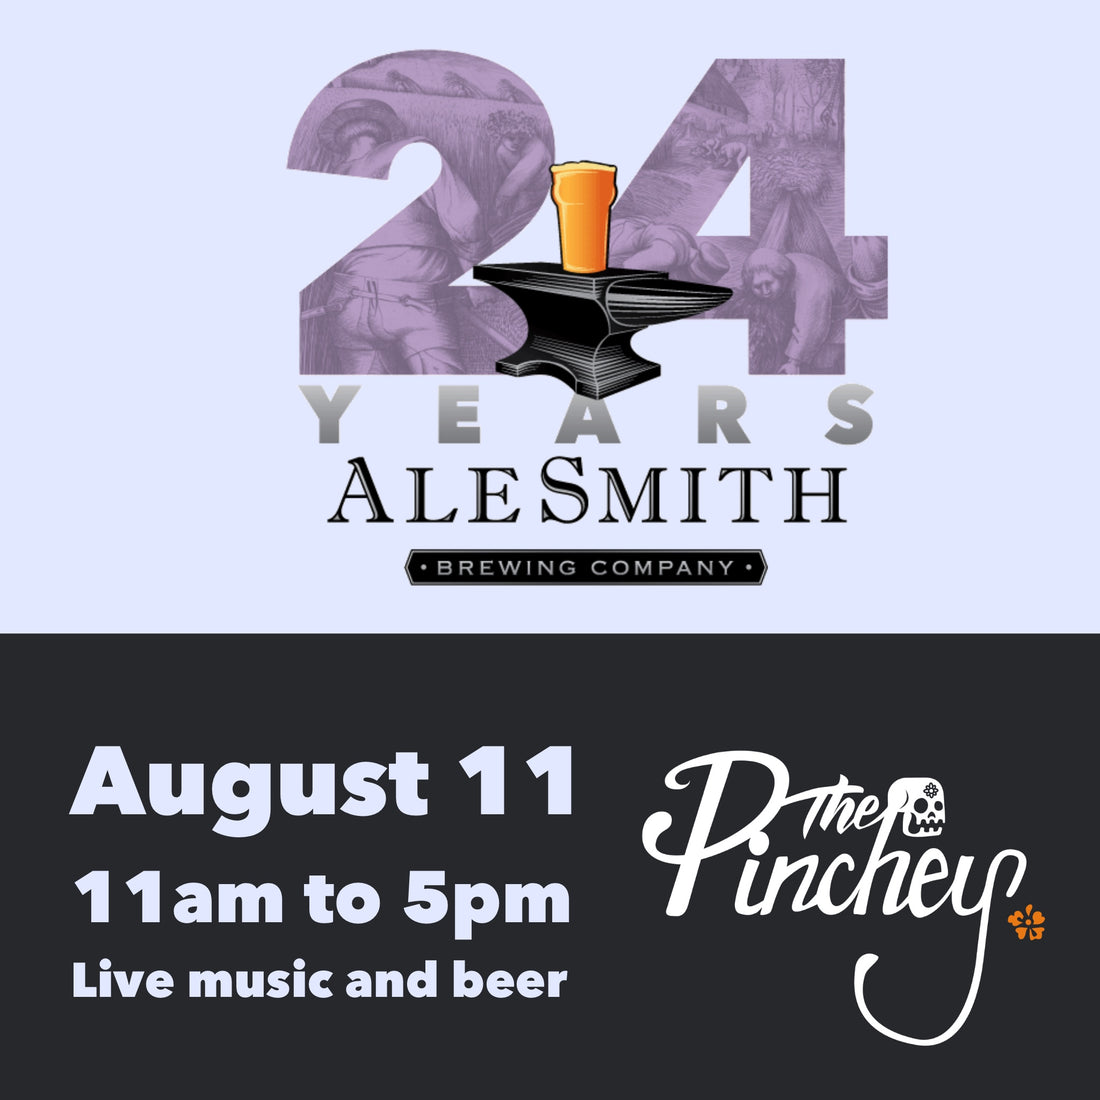 Event Alert - Alesmith Brewery 24 year Anniversary Event